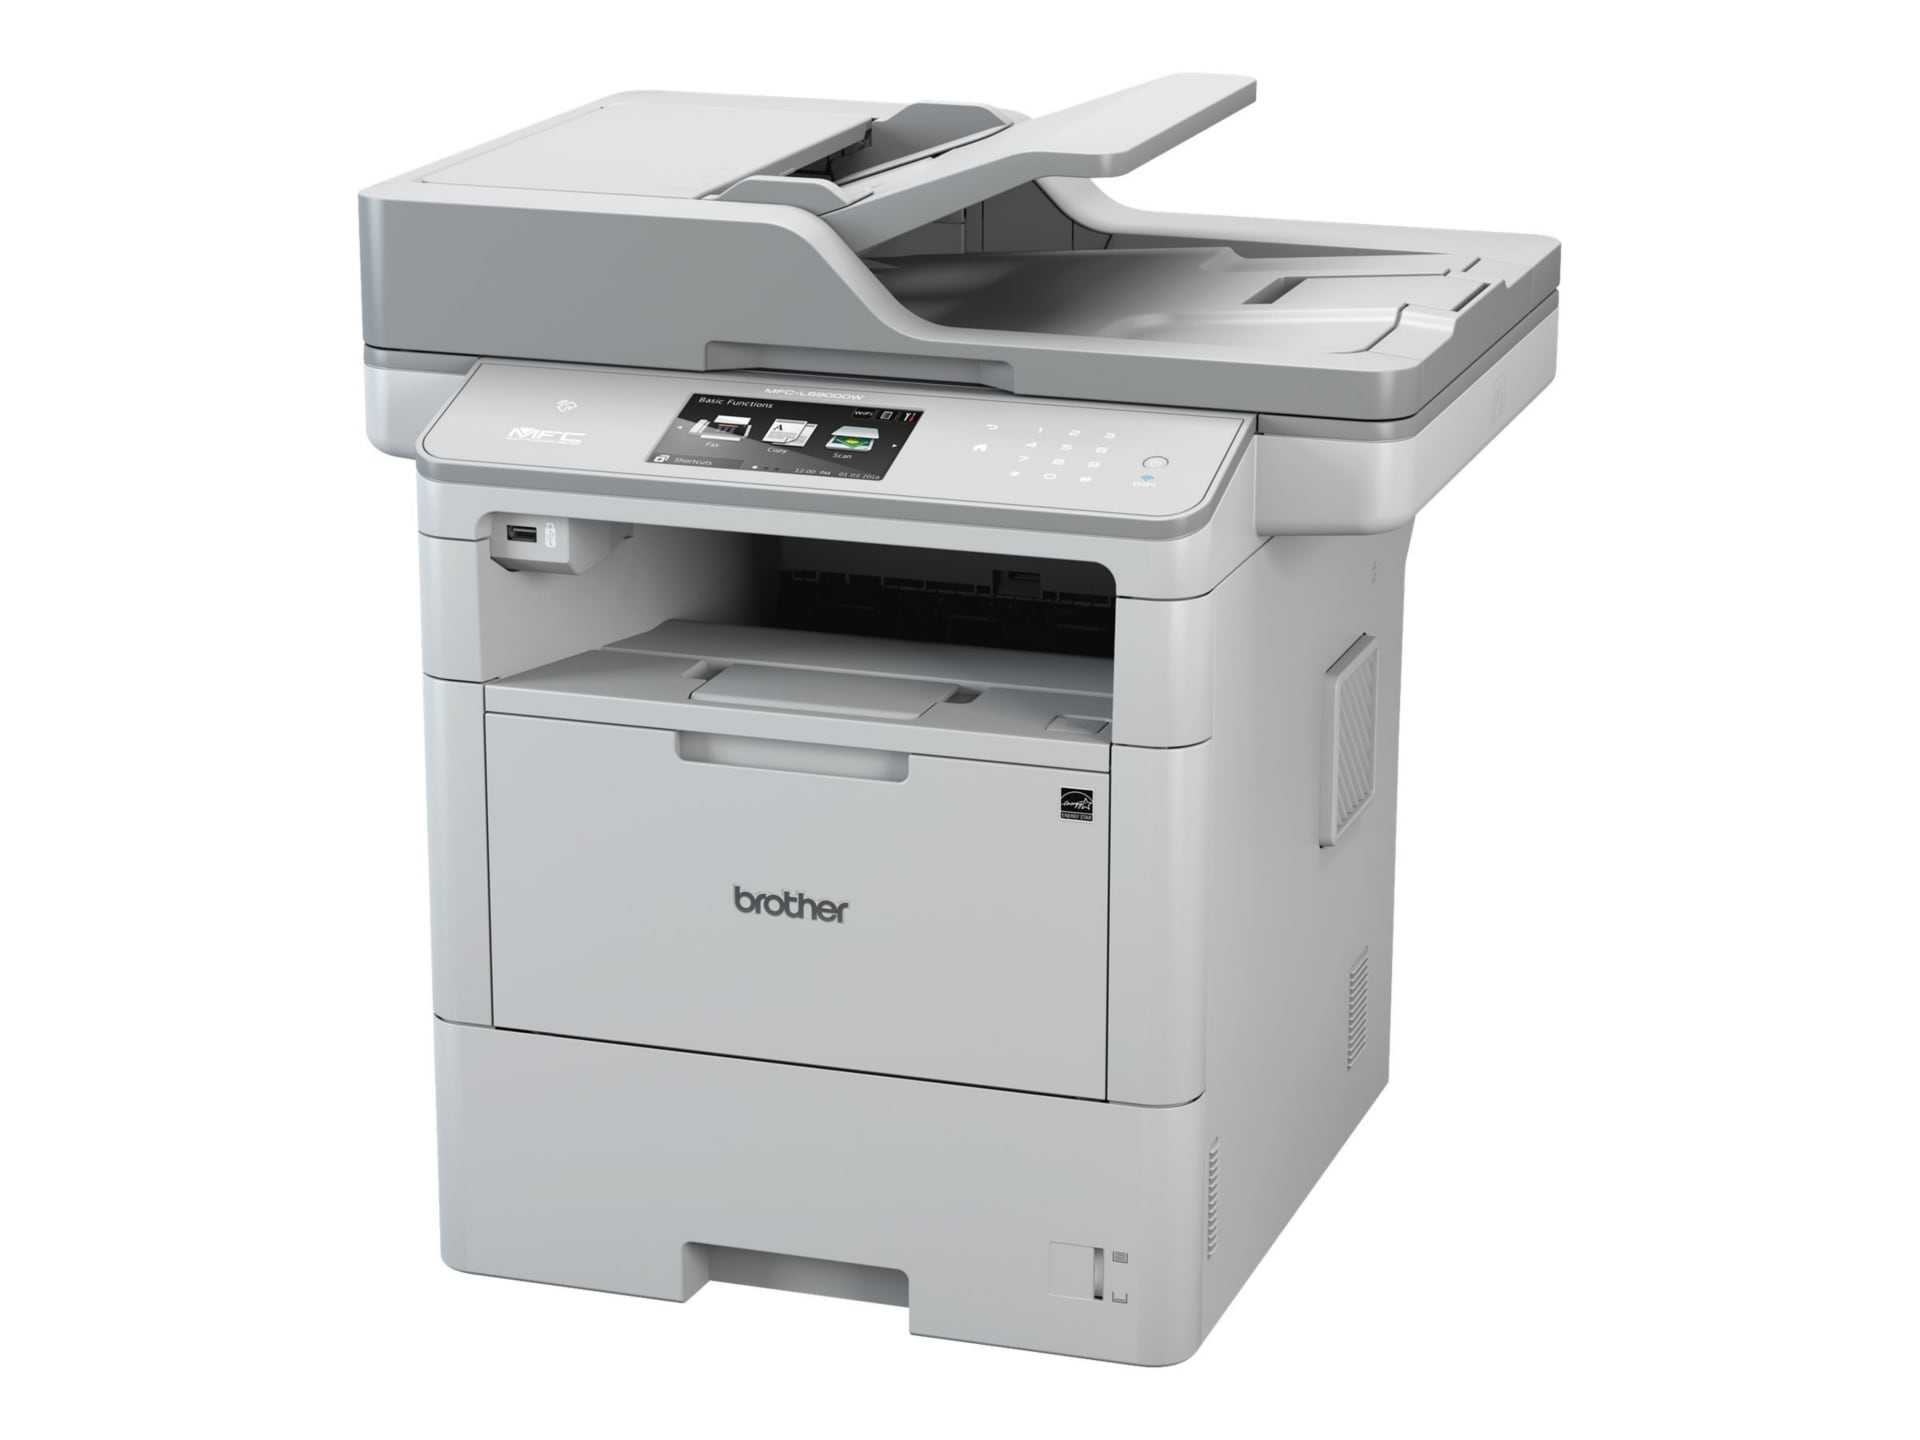 Monochrome Compact Laser All-in-One Printer with Duplex Printing and  Wireless Networking (Refurbished)